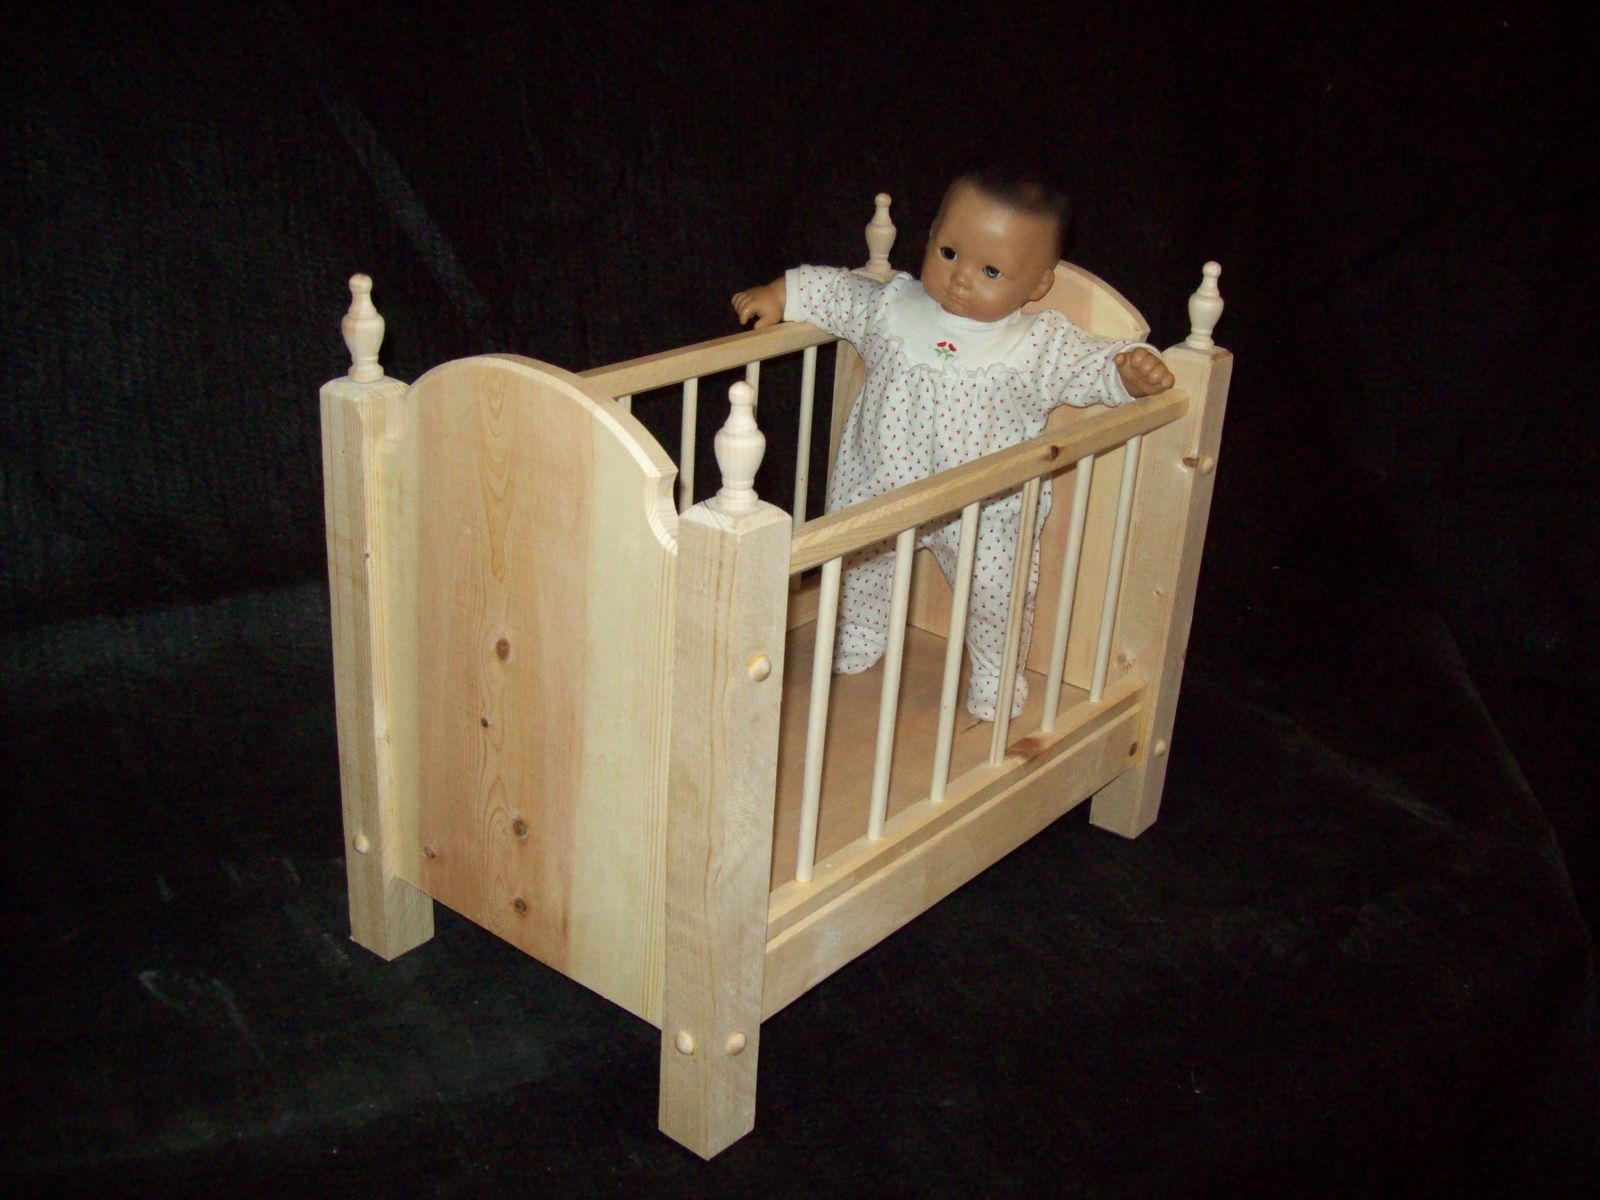 Handmade Crib For Bitty Baby Or Any 15 Doll By Pine Grove